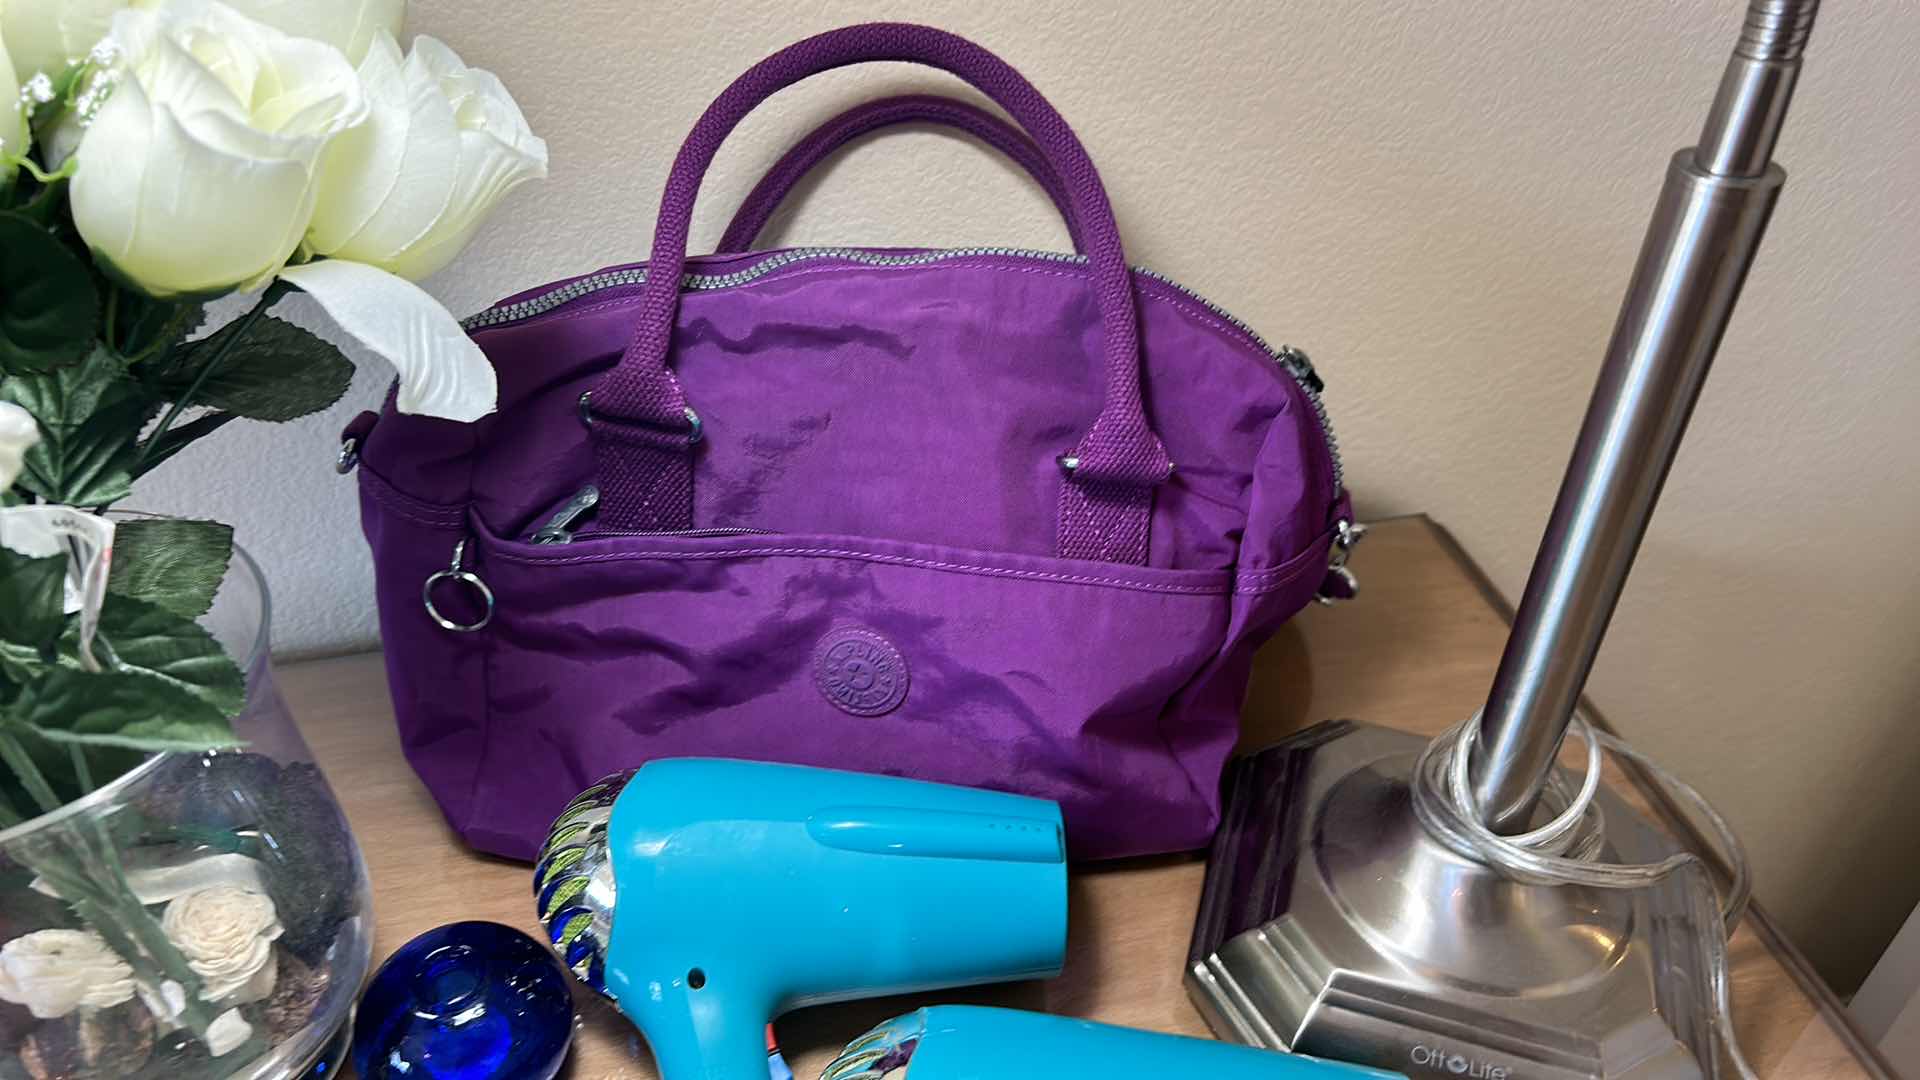 Photo 7 of MISC ASSORTMENT - PURPLE HANDBAG, VASE, TWO BLOW DYERS, LAMP AND MORE